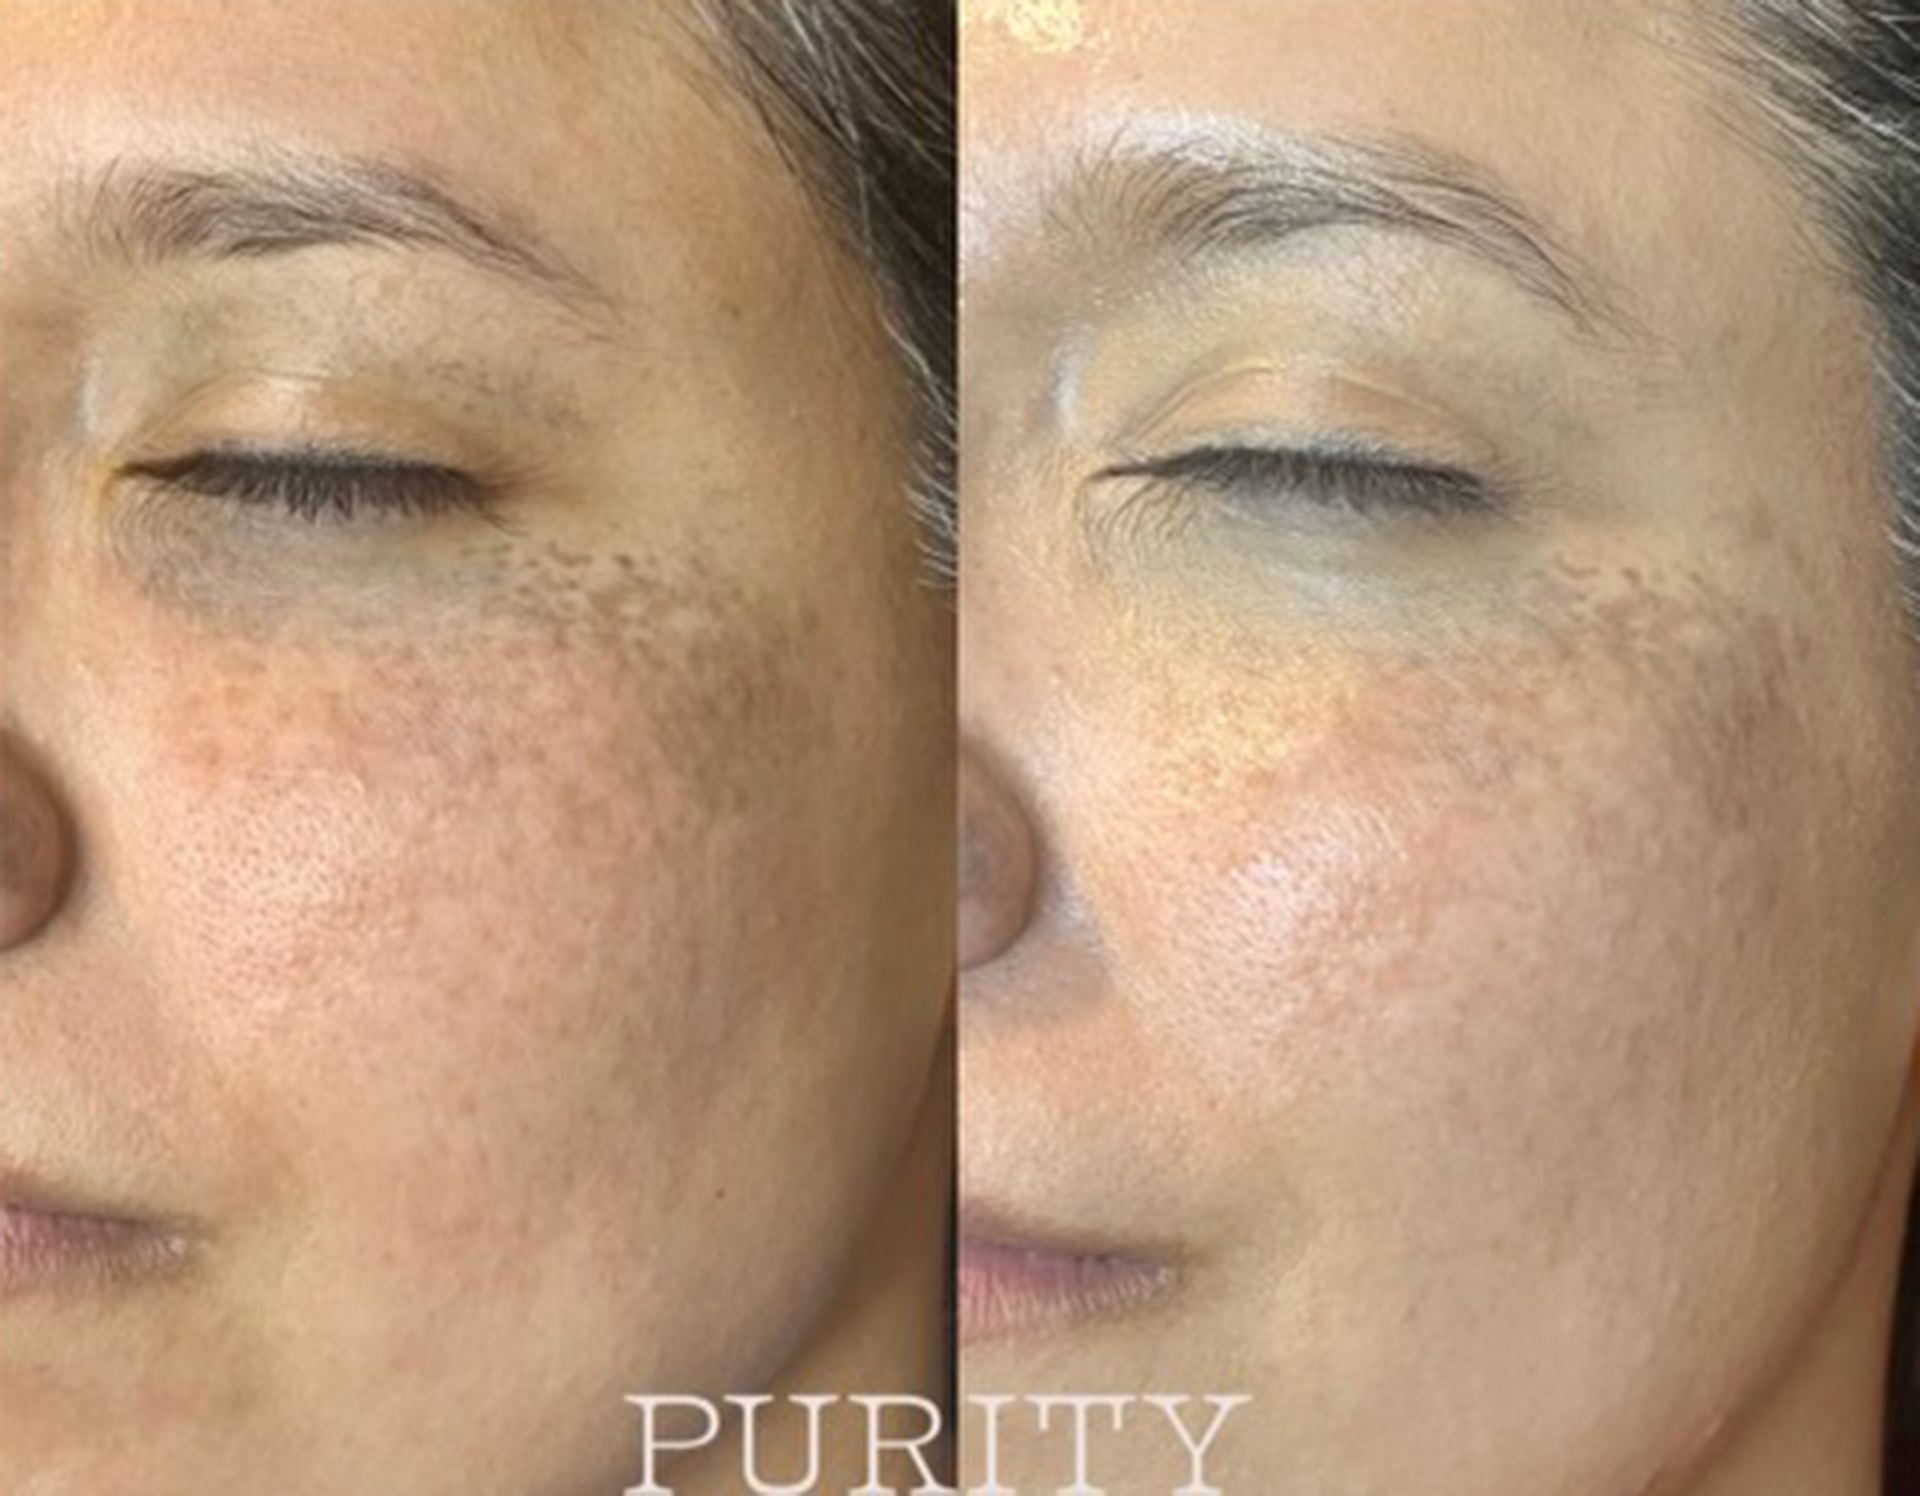 Skin pigmentation treatment before and after results image